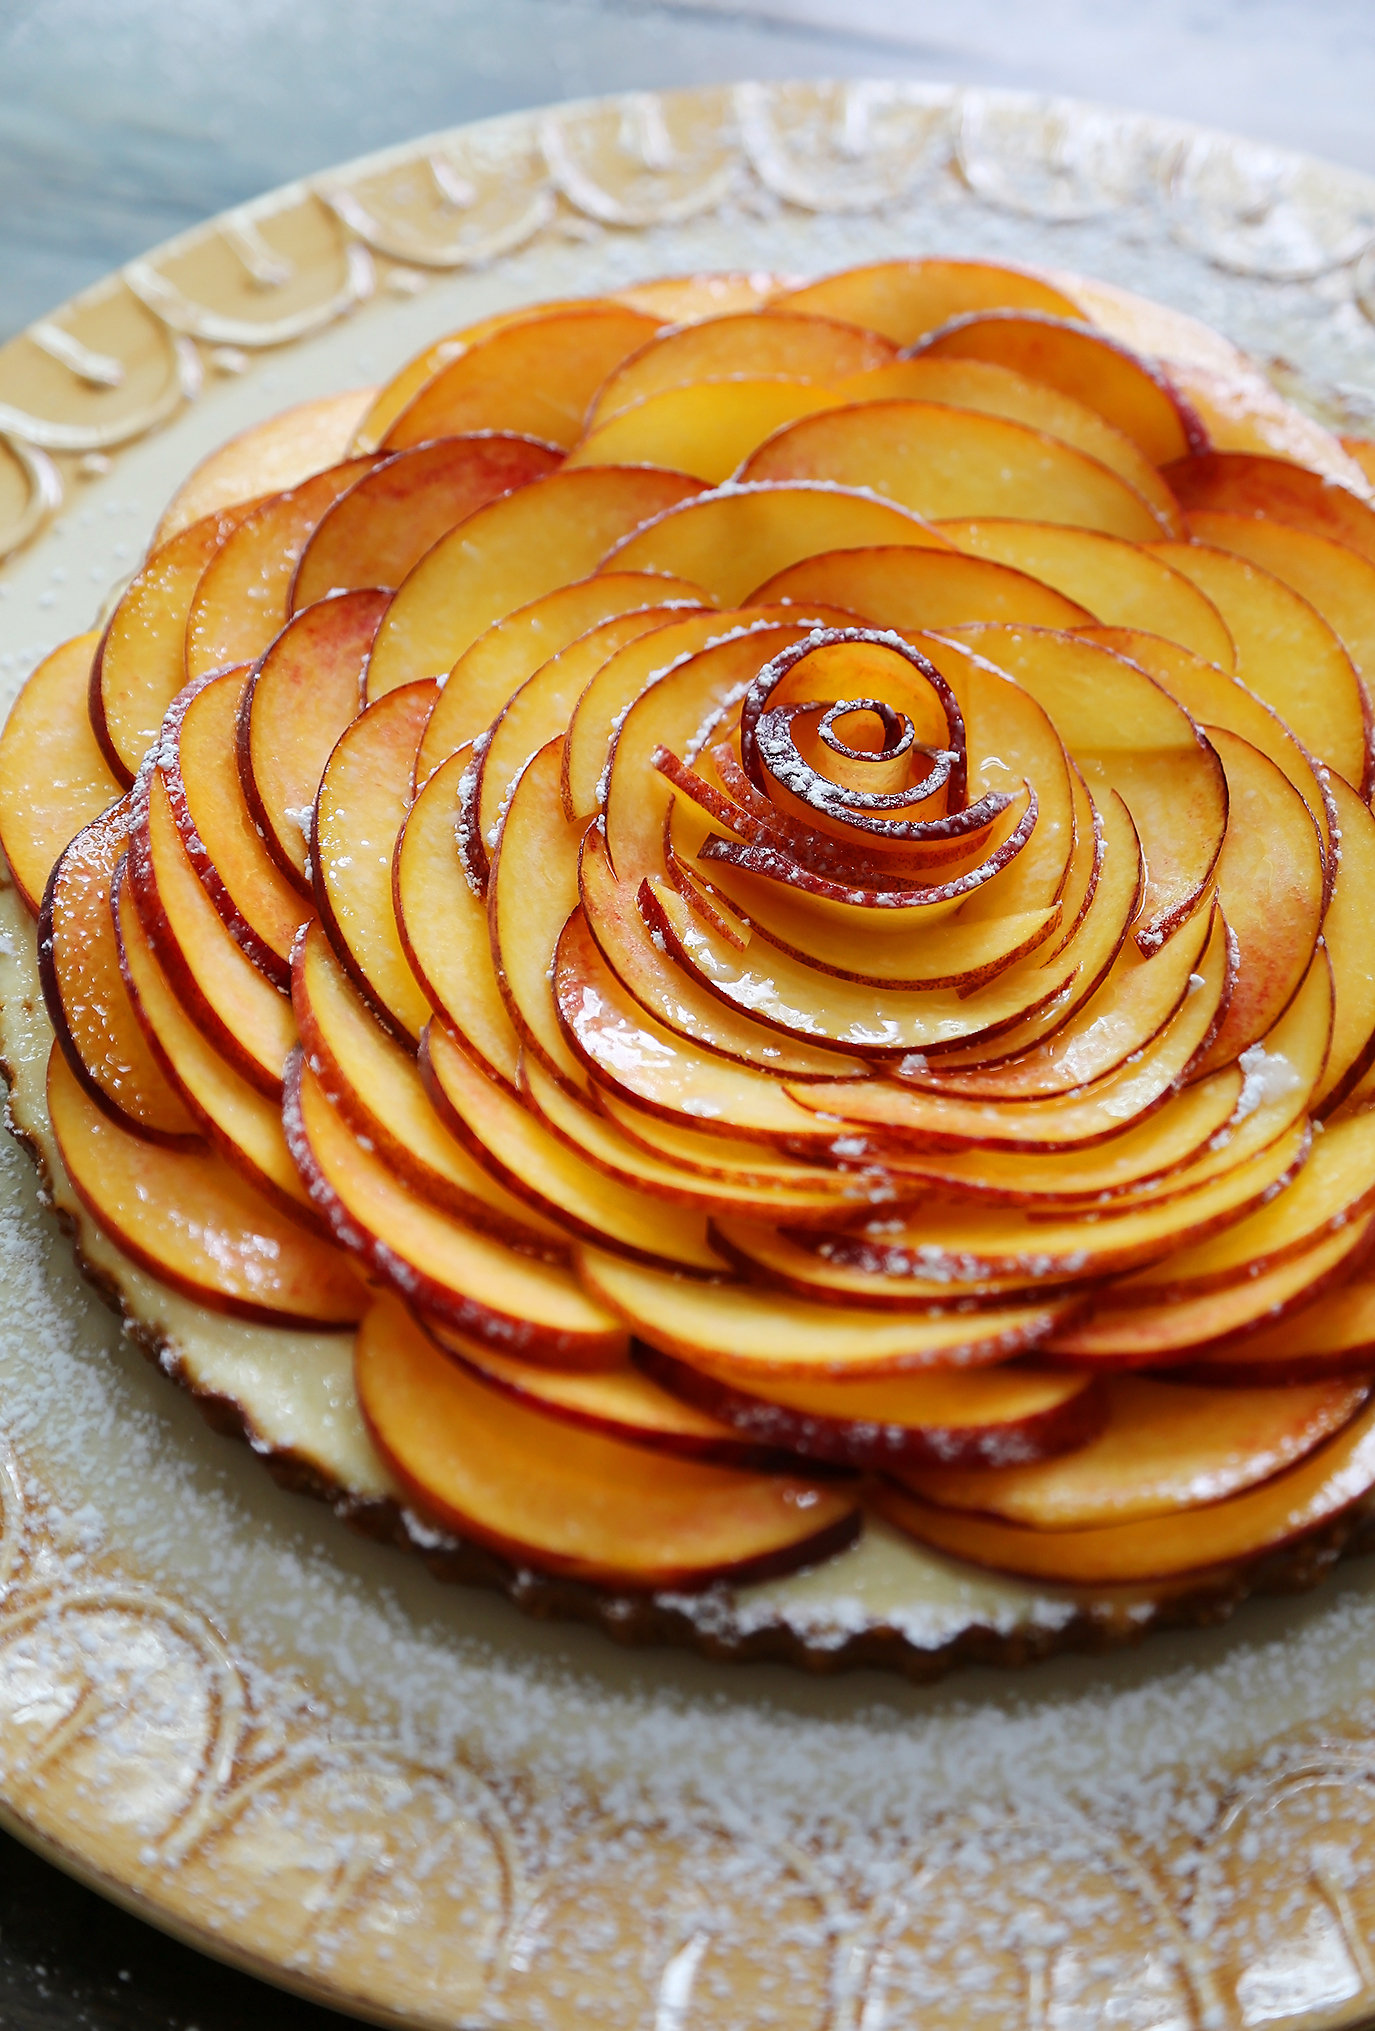 Creamy Peach and Honey Tart - Silky, rich cheesecake tart with a 5-ingredient filling. The perfect simple summer dessert! thecomfortofcooking.com